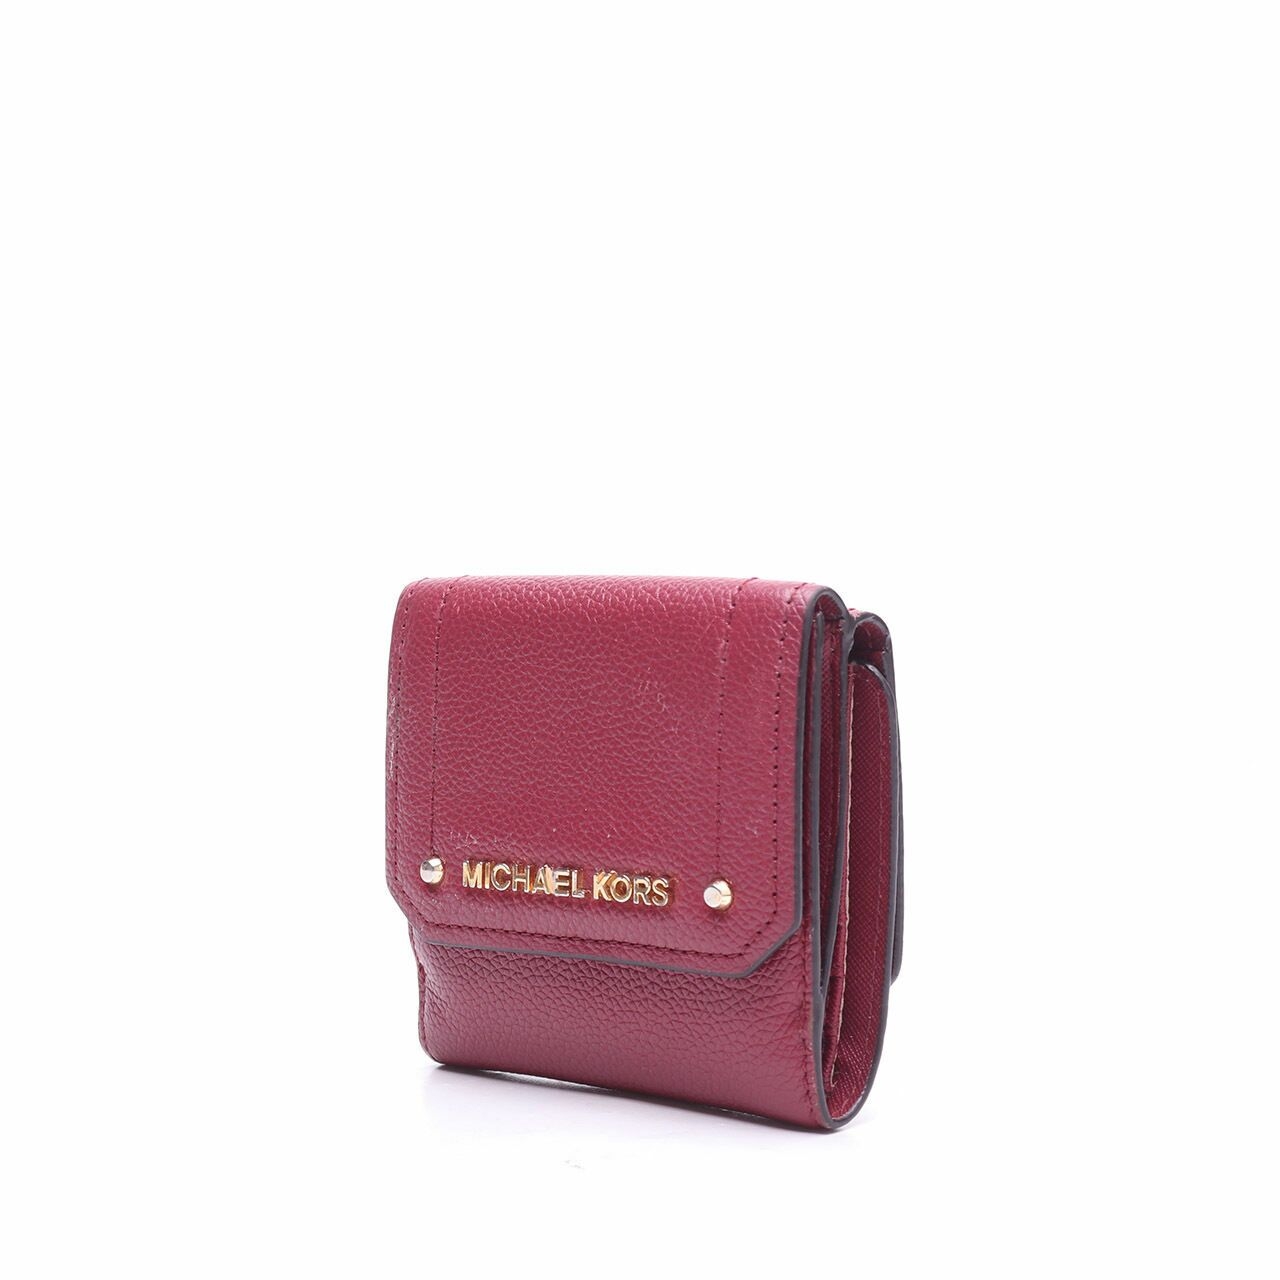 Michael Kors Burgundy Hayes Leather Medium Trifold Coint Case Wallet